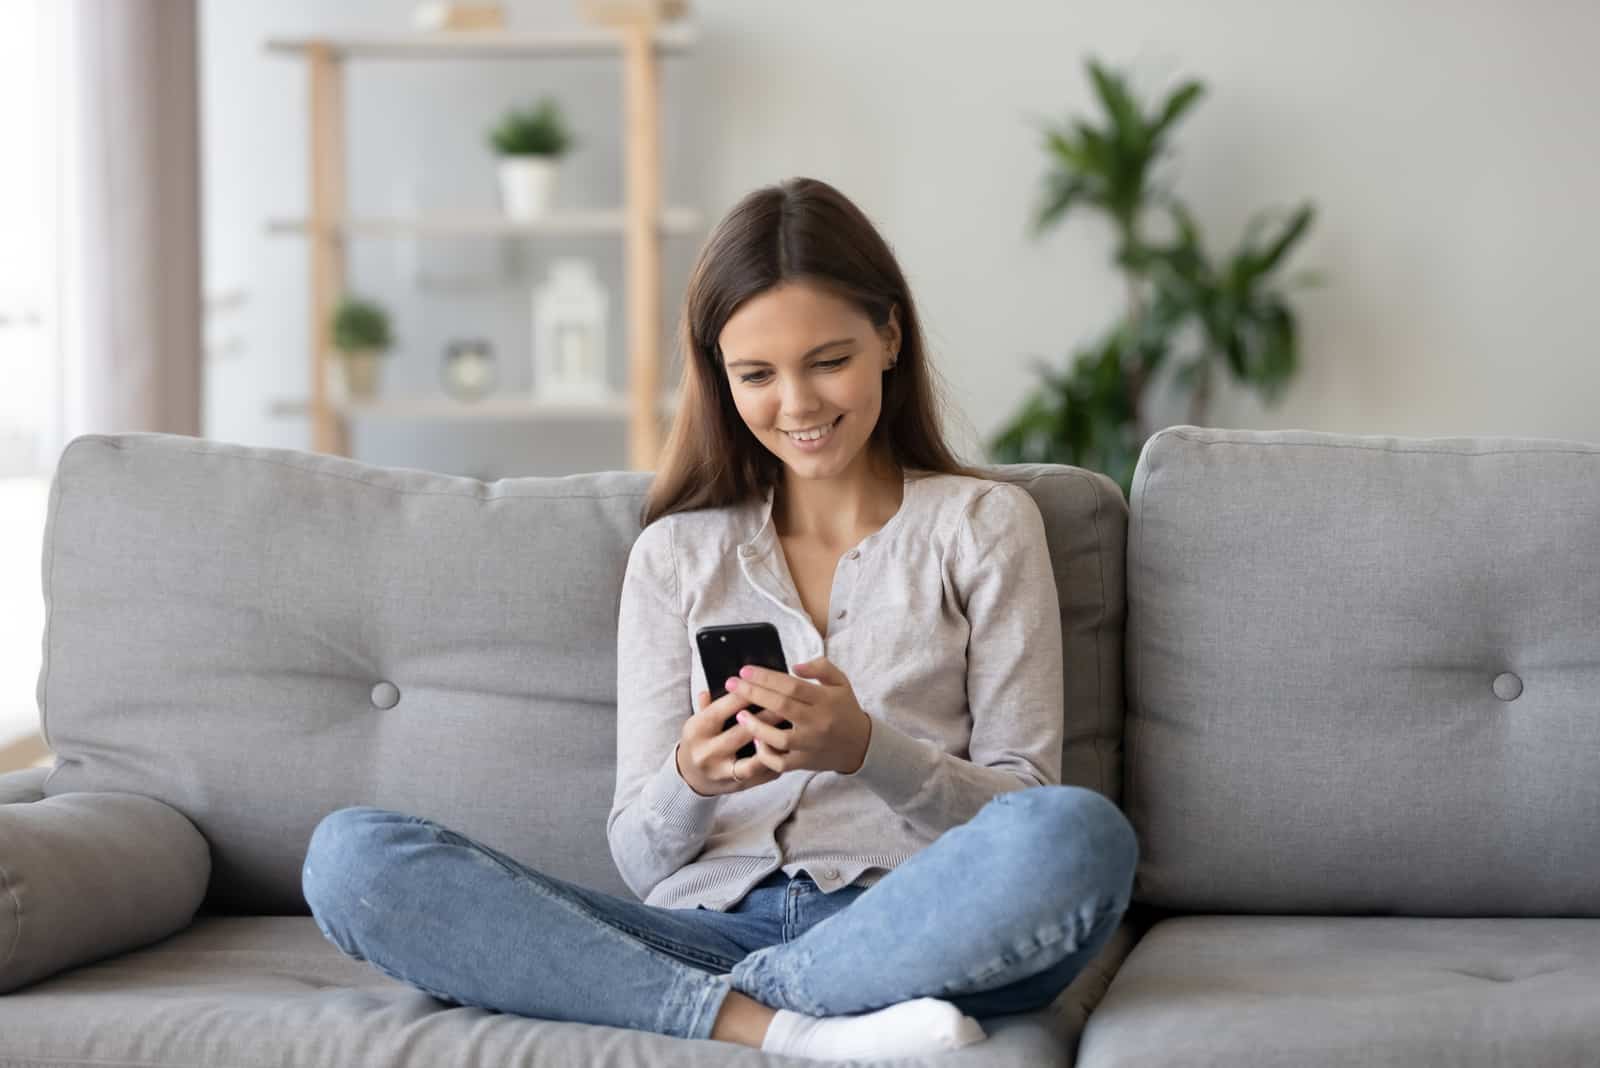 happy woman sitting on sofa while on her phone